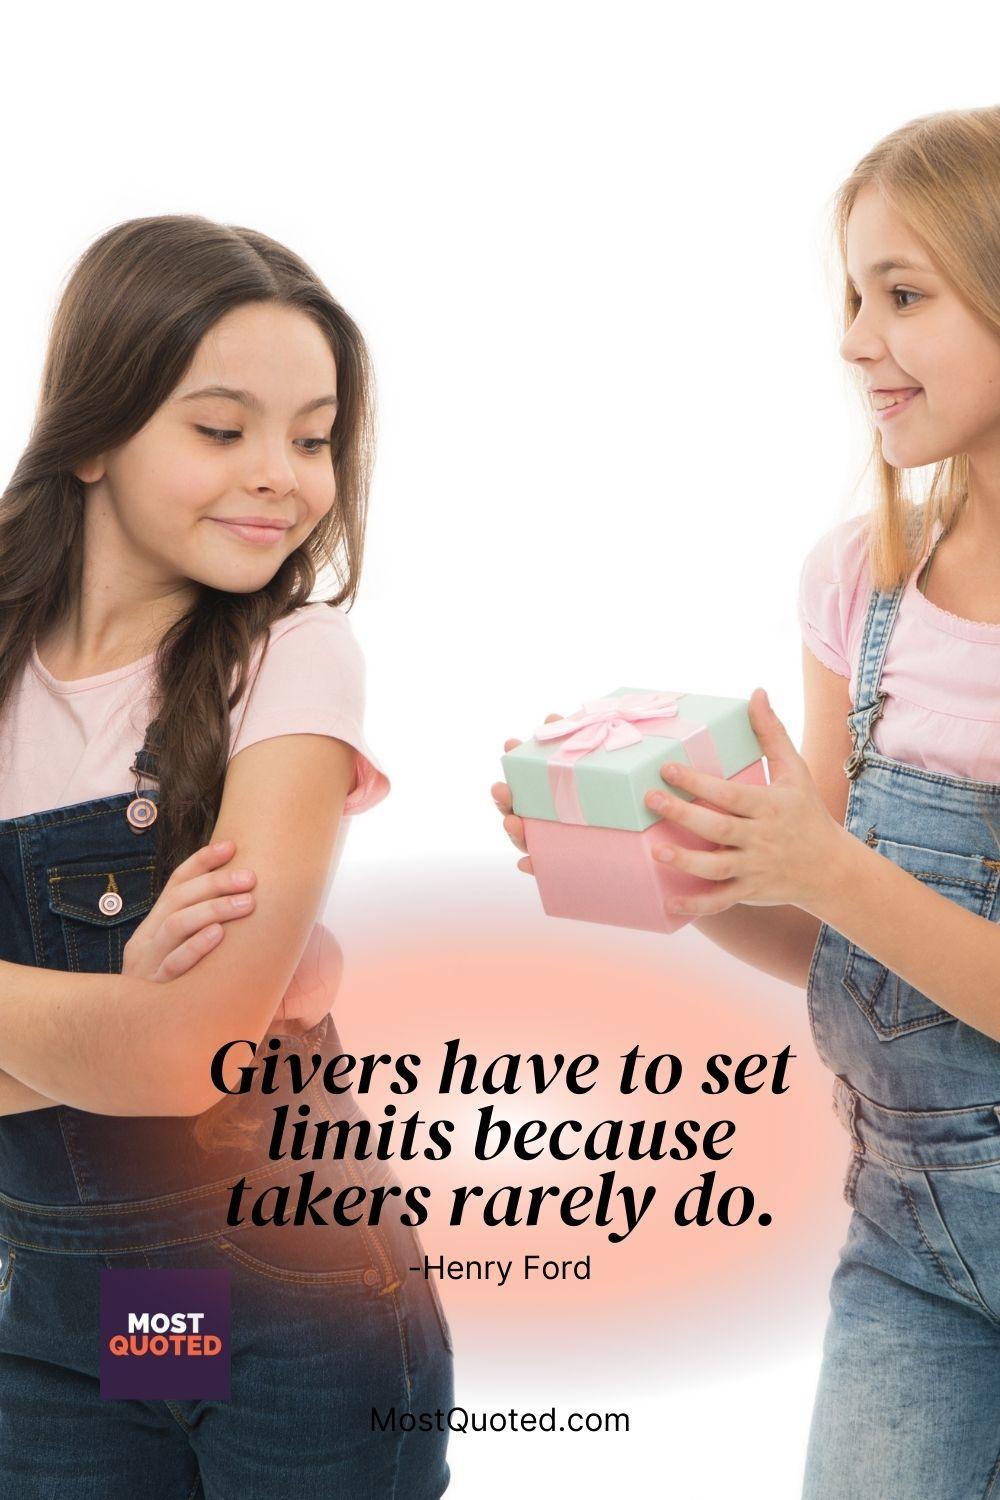 Givers have to set limits because takers rarely do. - Henry Ford